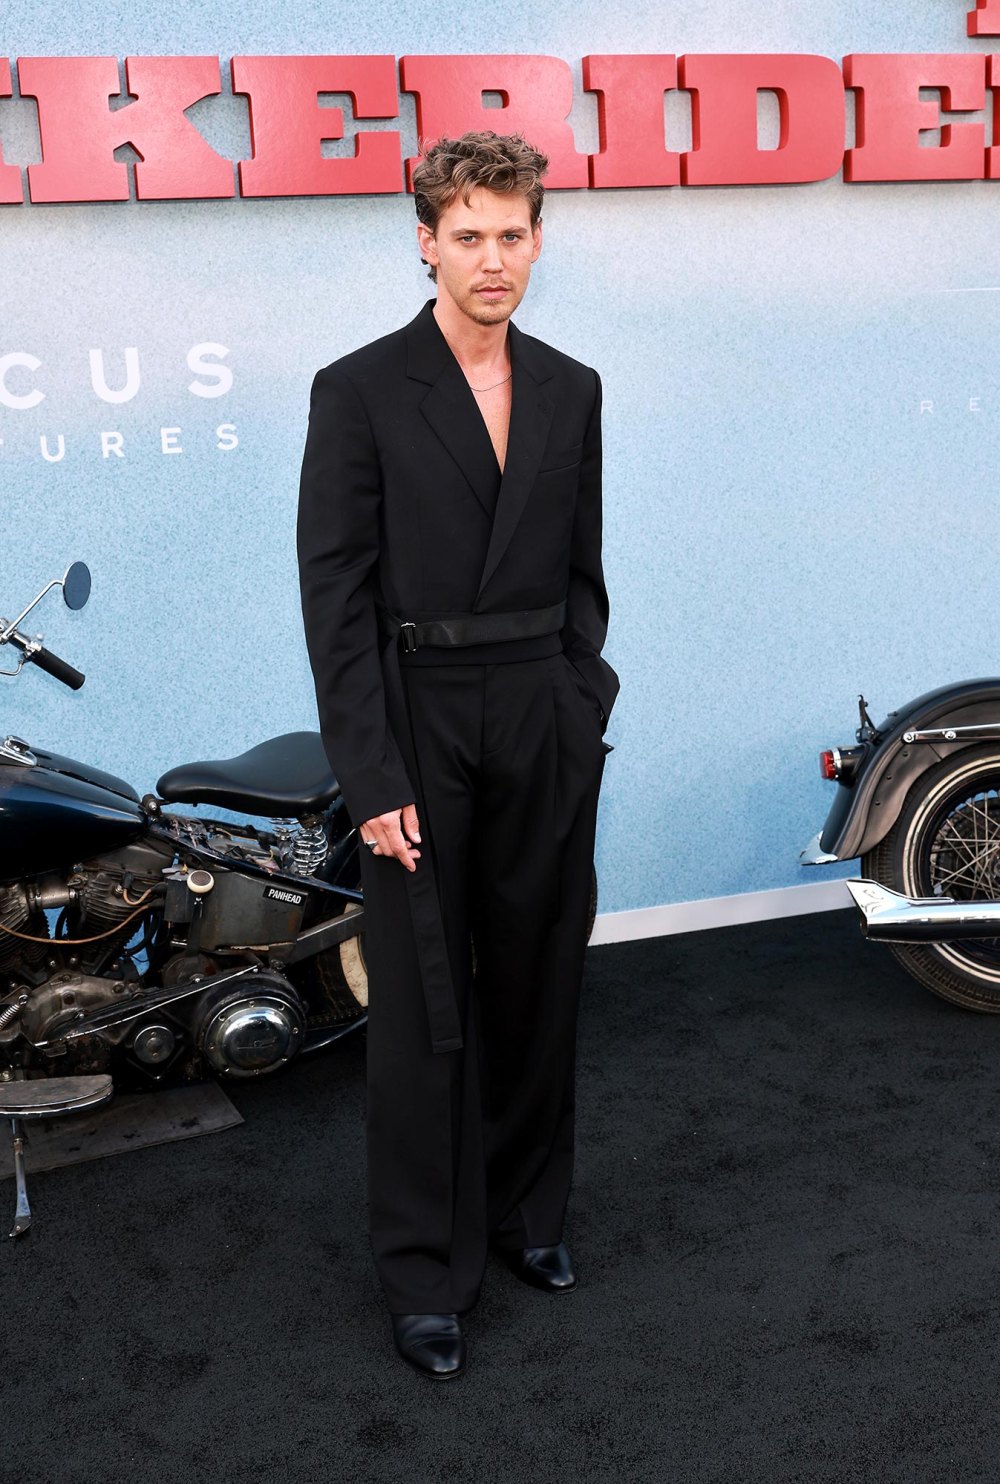 Austin Butler Wears Cropped Suit Picked Out by GF Kaia Gerber at The Bikeriders Premiere